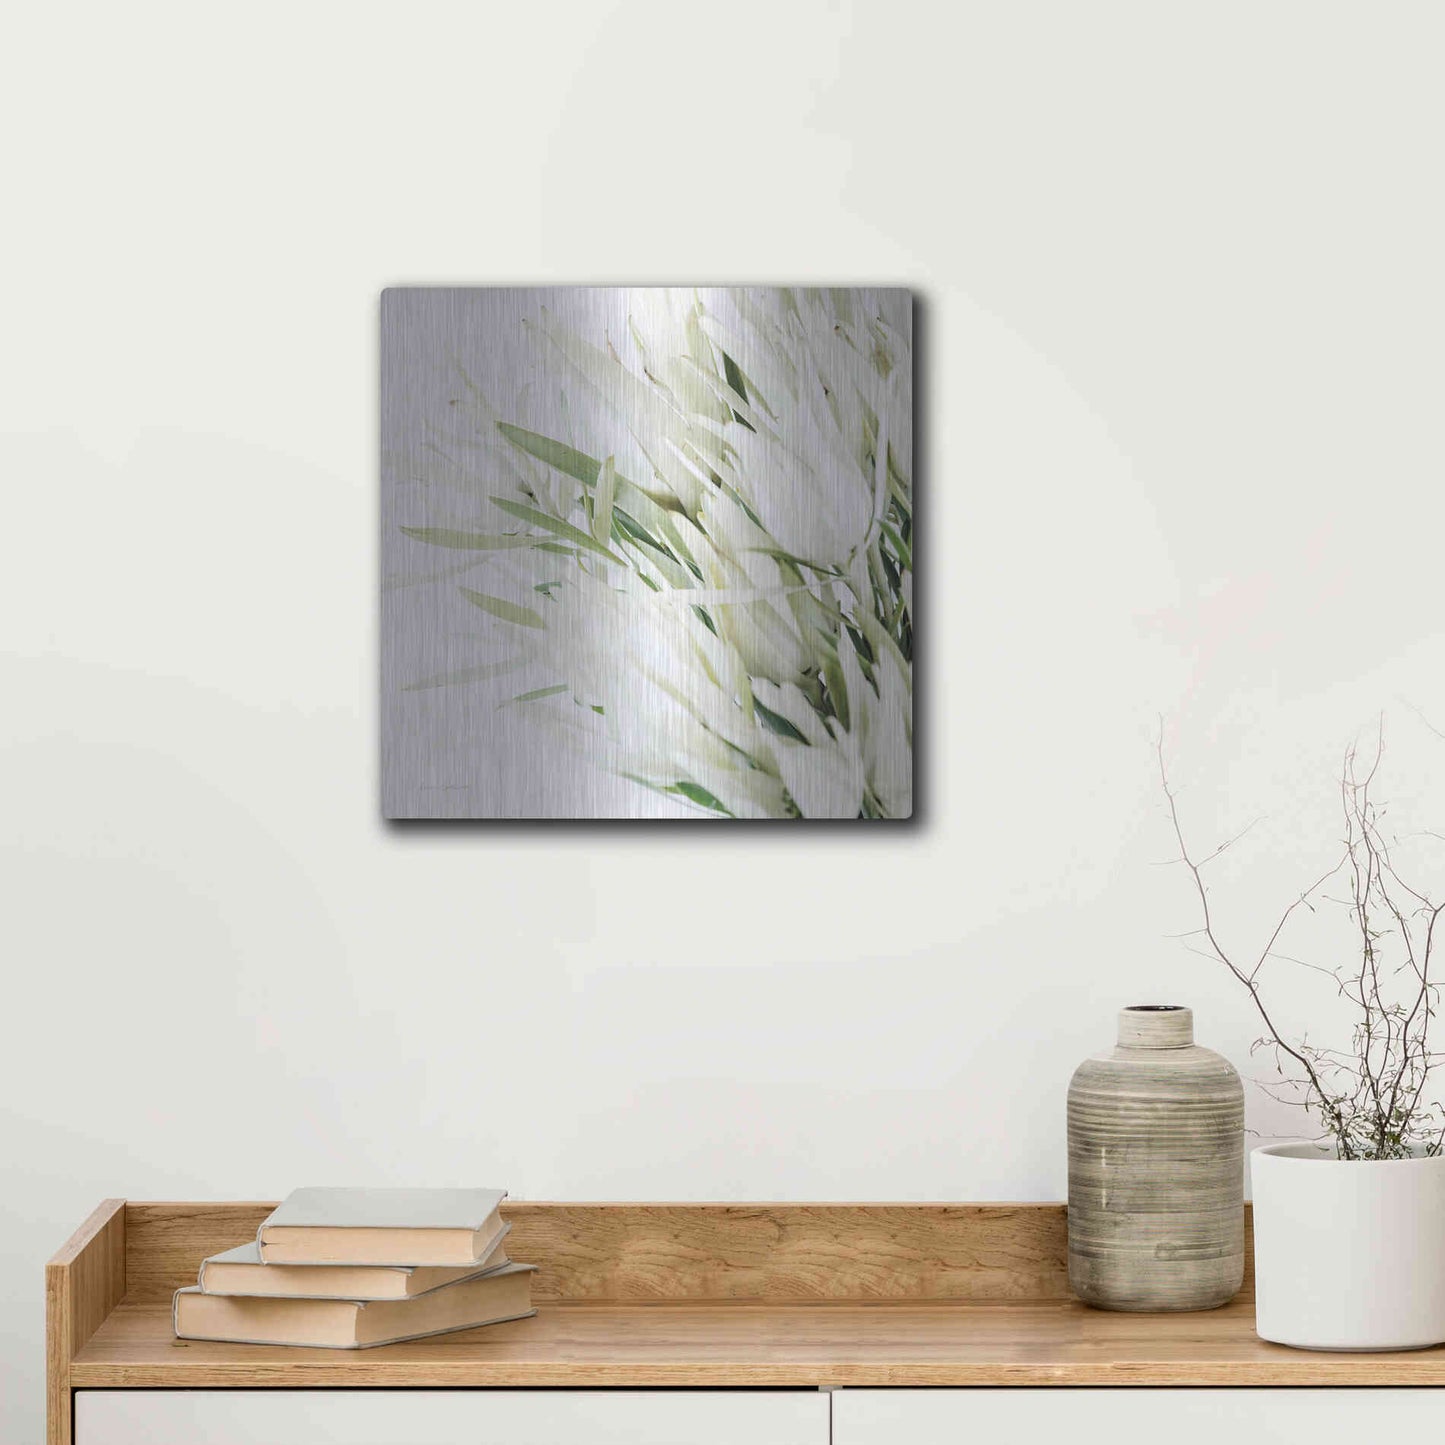 Luxe Metal Art 'Leucadendron Oasis Crop' by Elise Catterall, Metal Wall Art,12x12